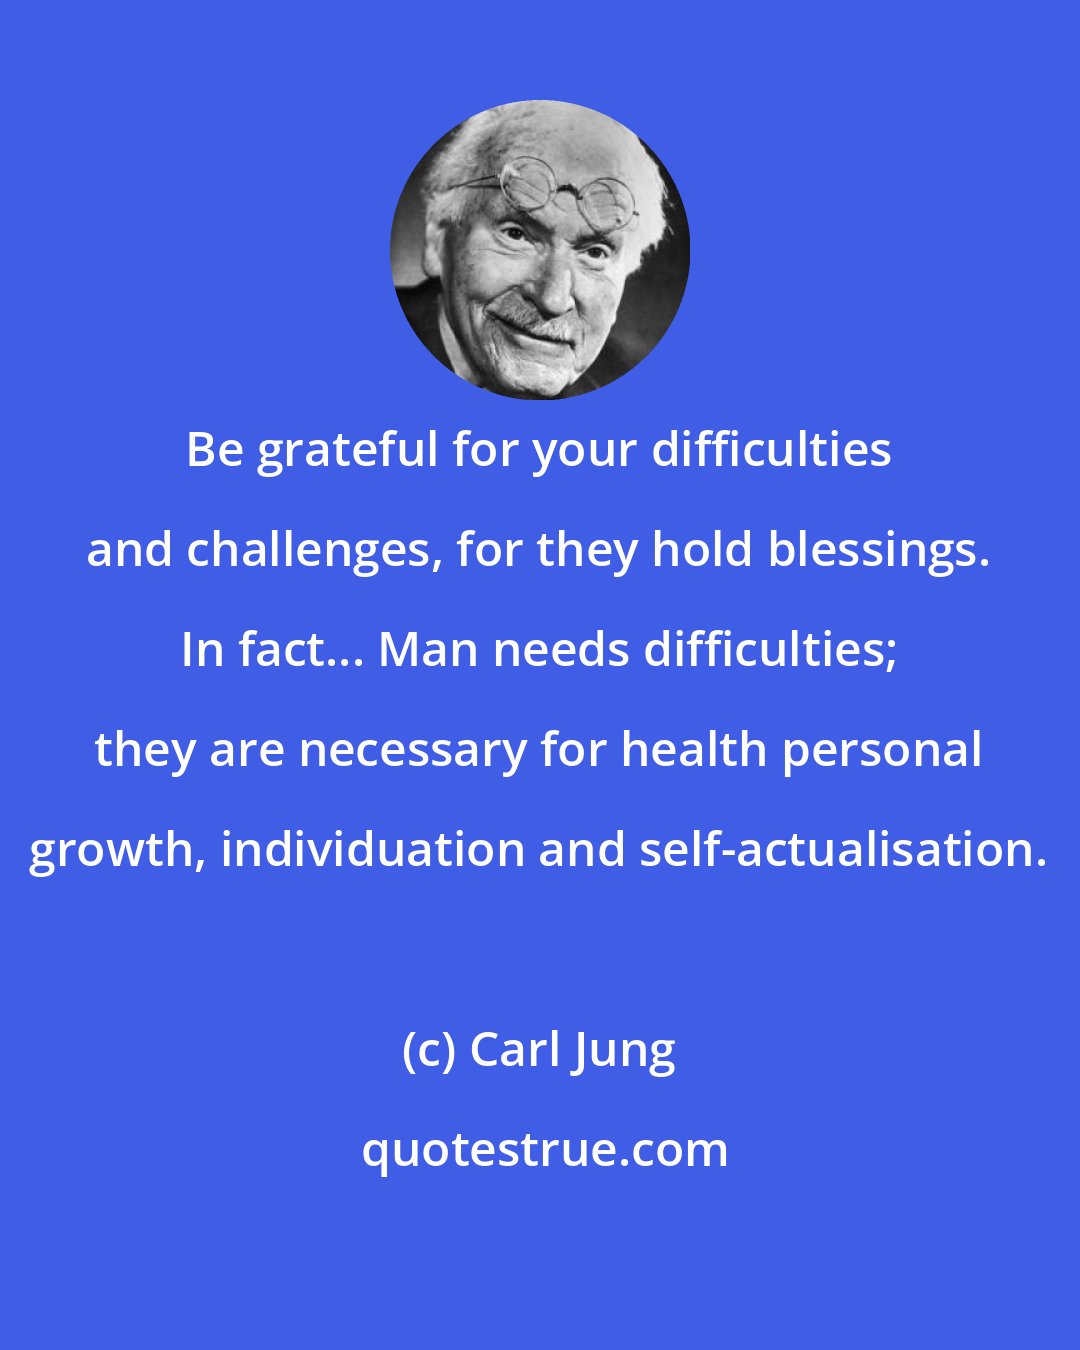 Carl Jung: Be grateful for your difficulties and challenges, for they hold blessings. In fact... Man needs difficulties; they are necessary for health personal growth, individuation and self-actualisation.